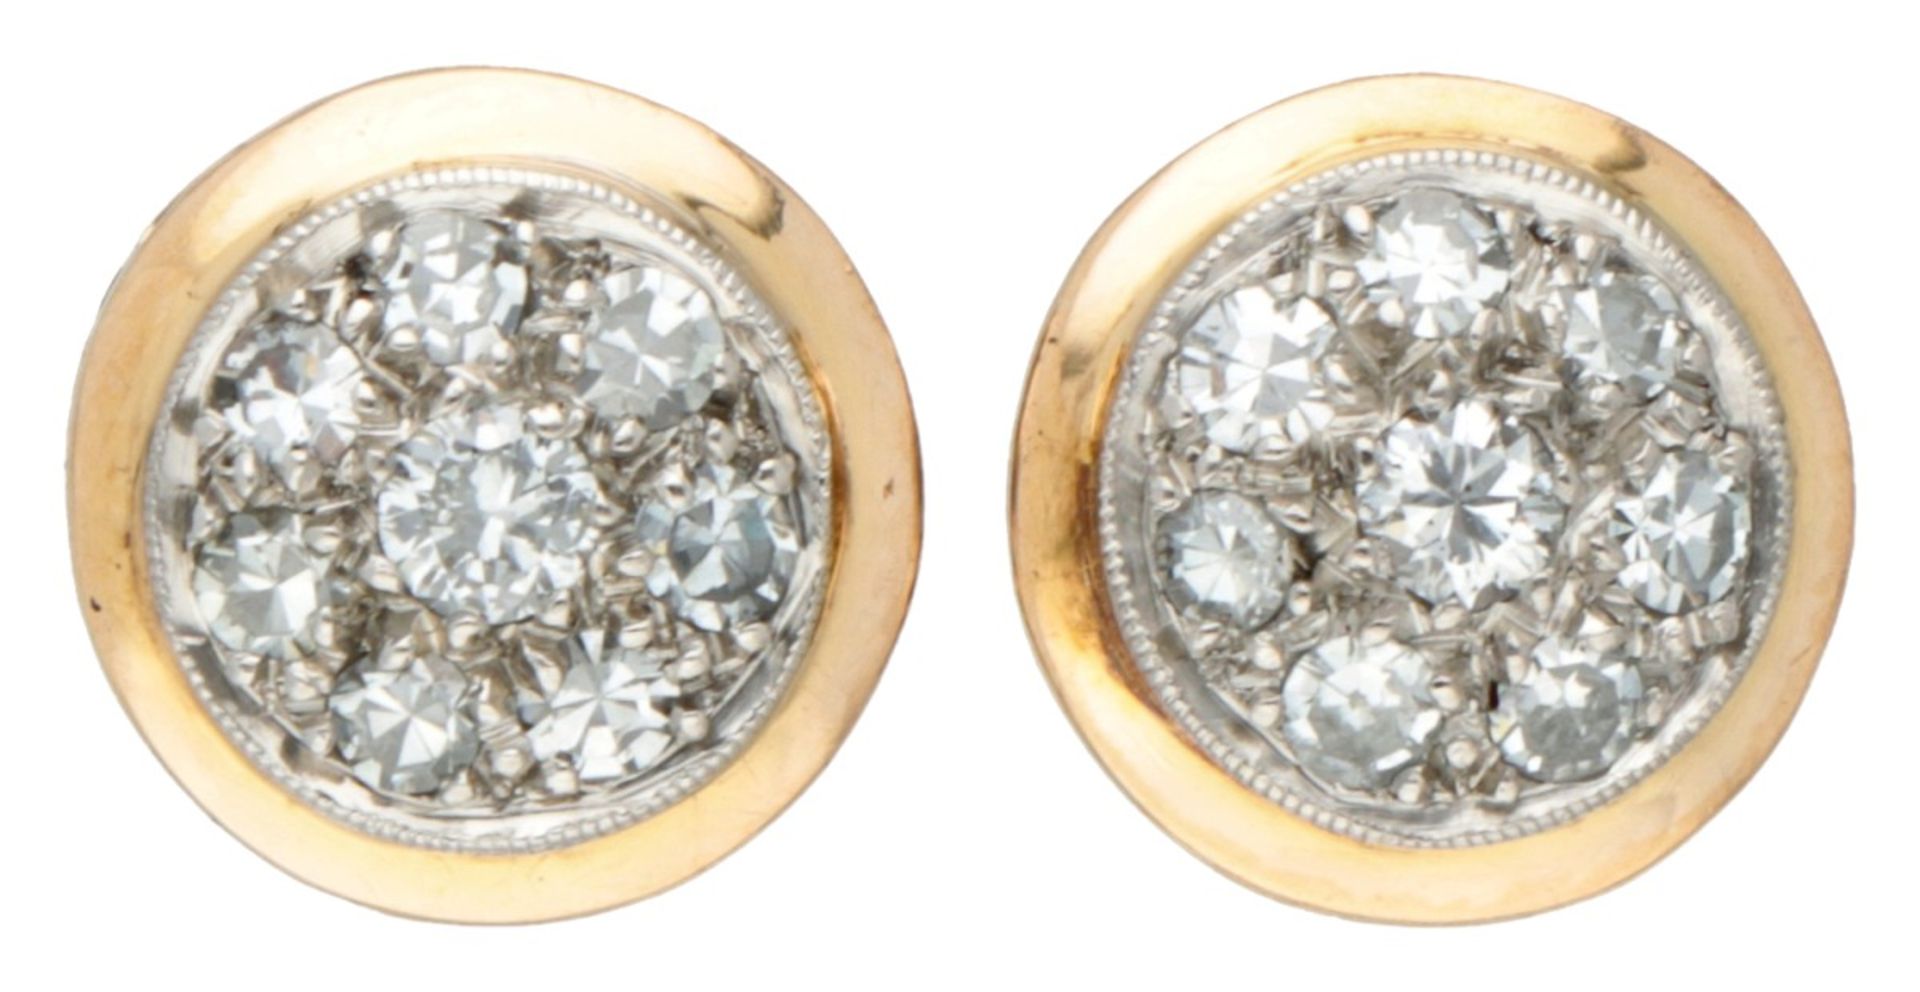 Vintage 18K. yellow gold and Pt 950 platinum earrings set with approx. 0.40 ct. diamond.